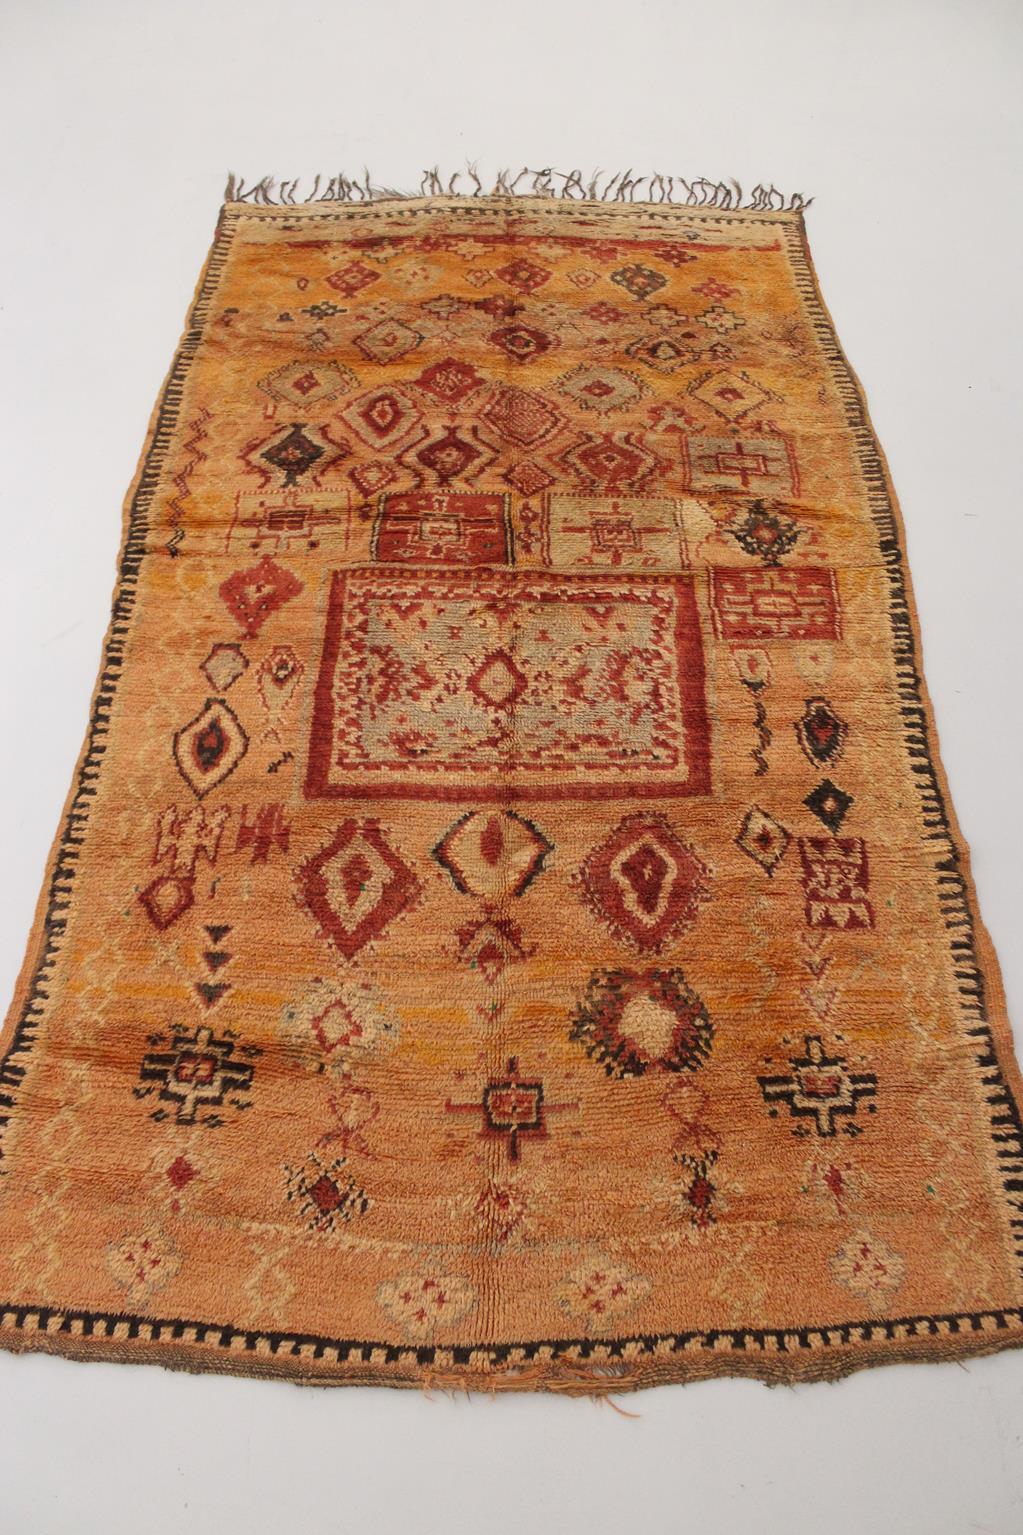 Vintage Moroccan Taznakht rug - Orange/red - 5.2x9.5feet / 161x292cm In Good Condition For Sale In Marrakech, MA